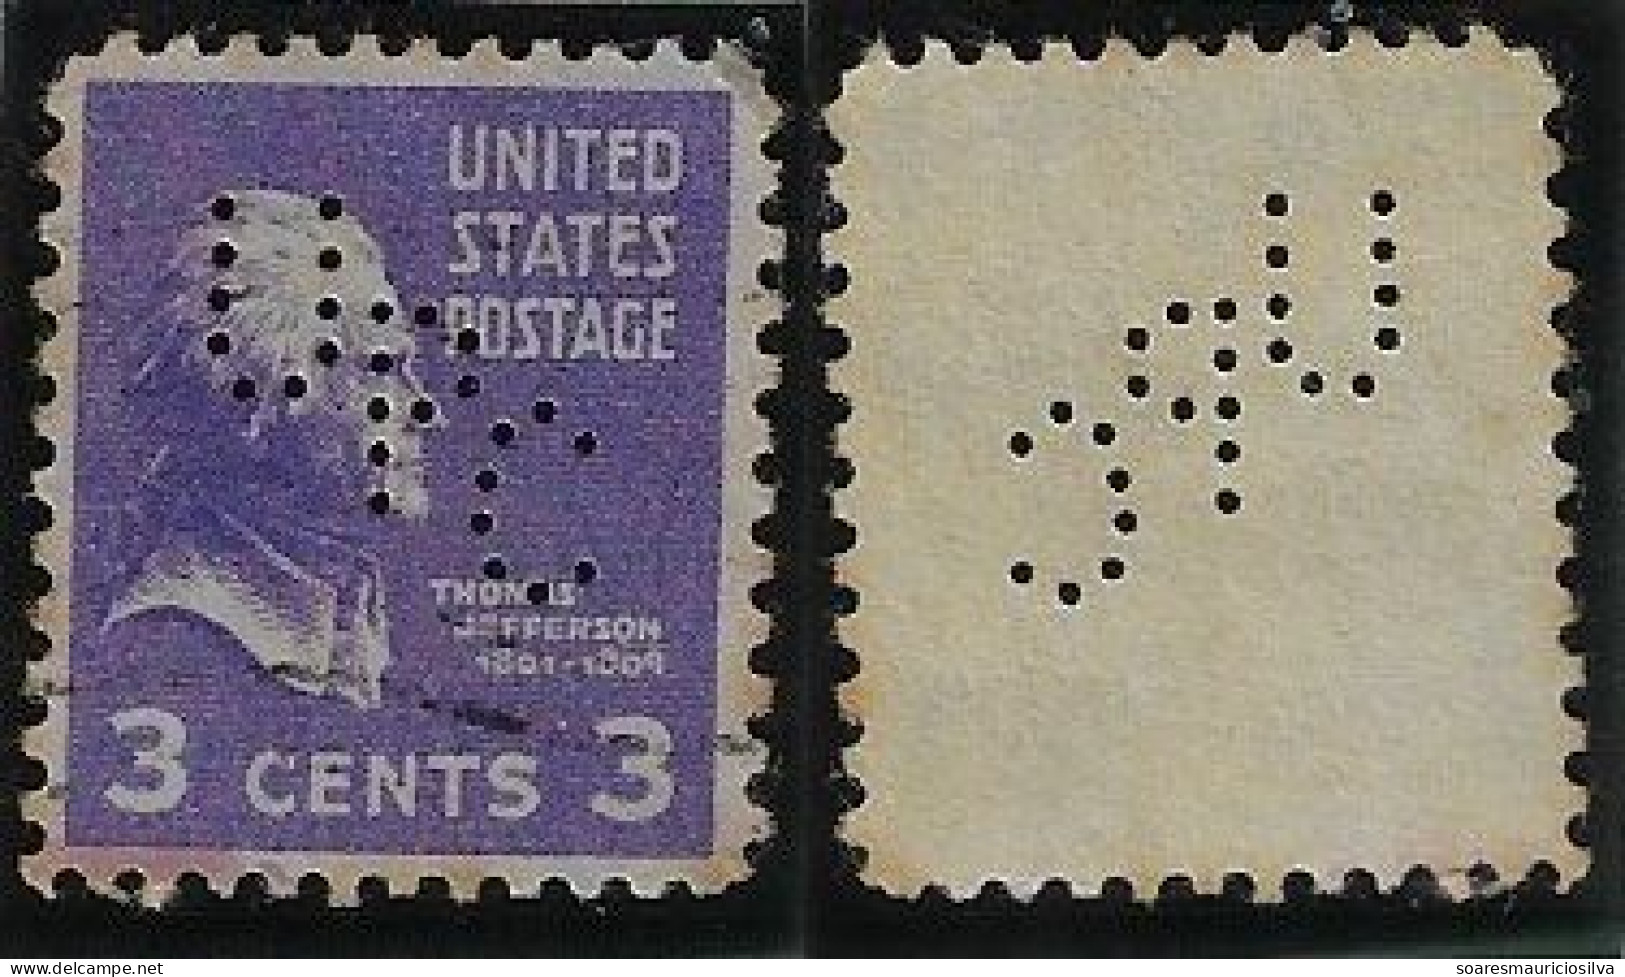 USA United States 1931/1954 Stamp With Perfin UPC By The Union Pacific Coal Company From Rock Springs Lochung Perfore - Perforés